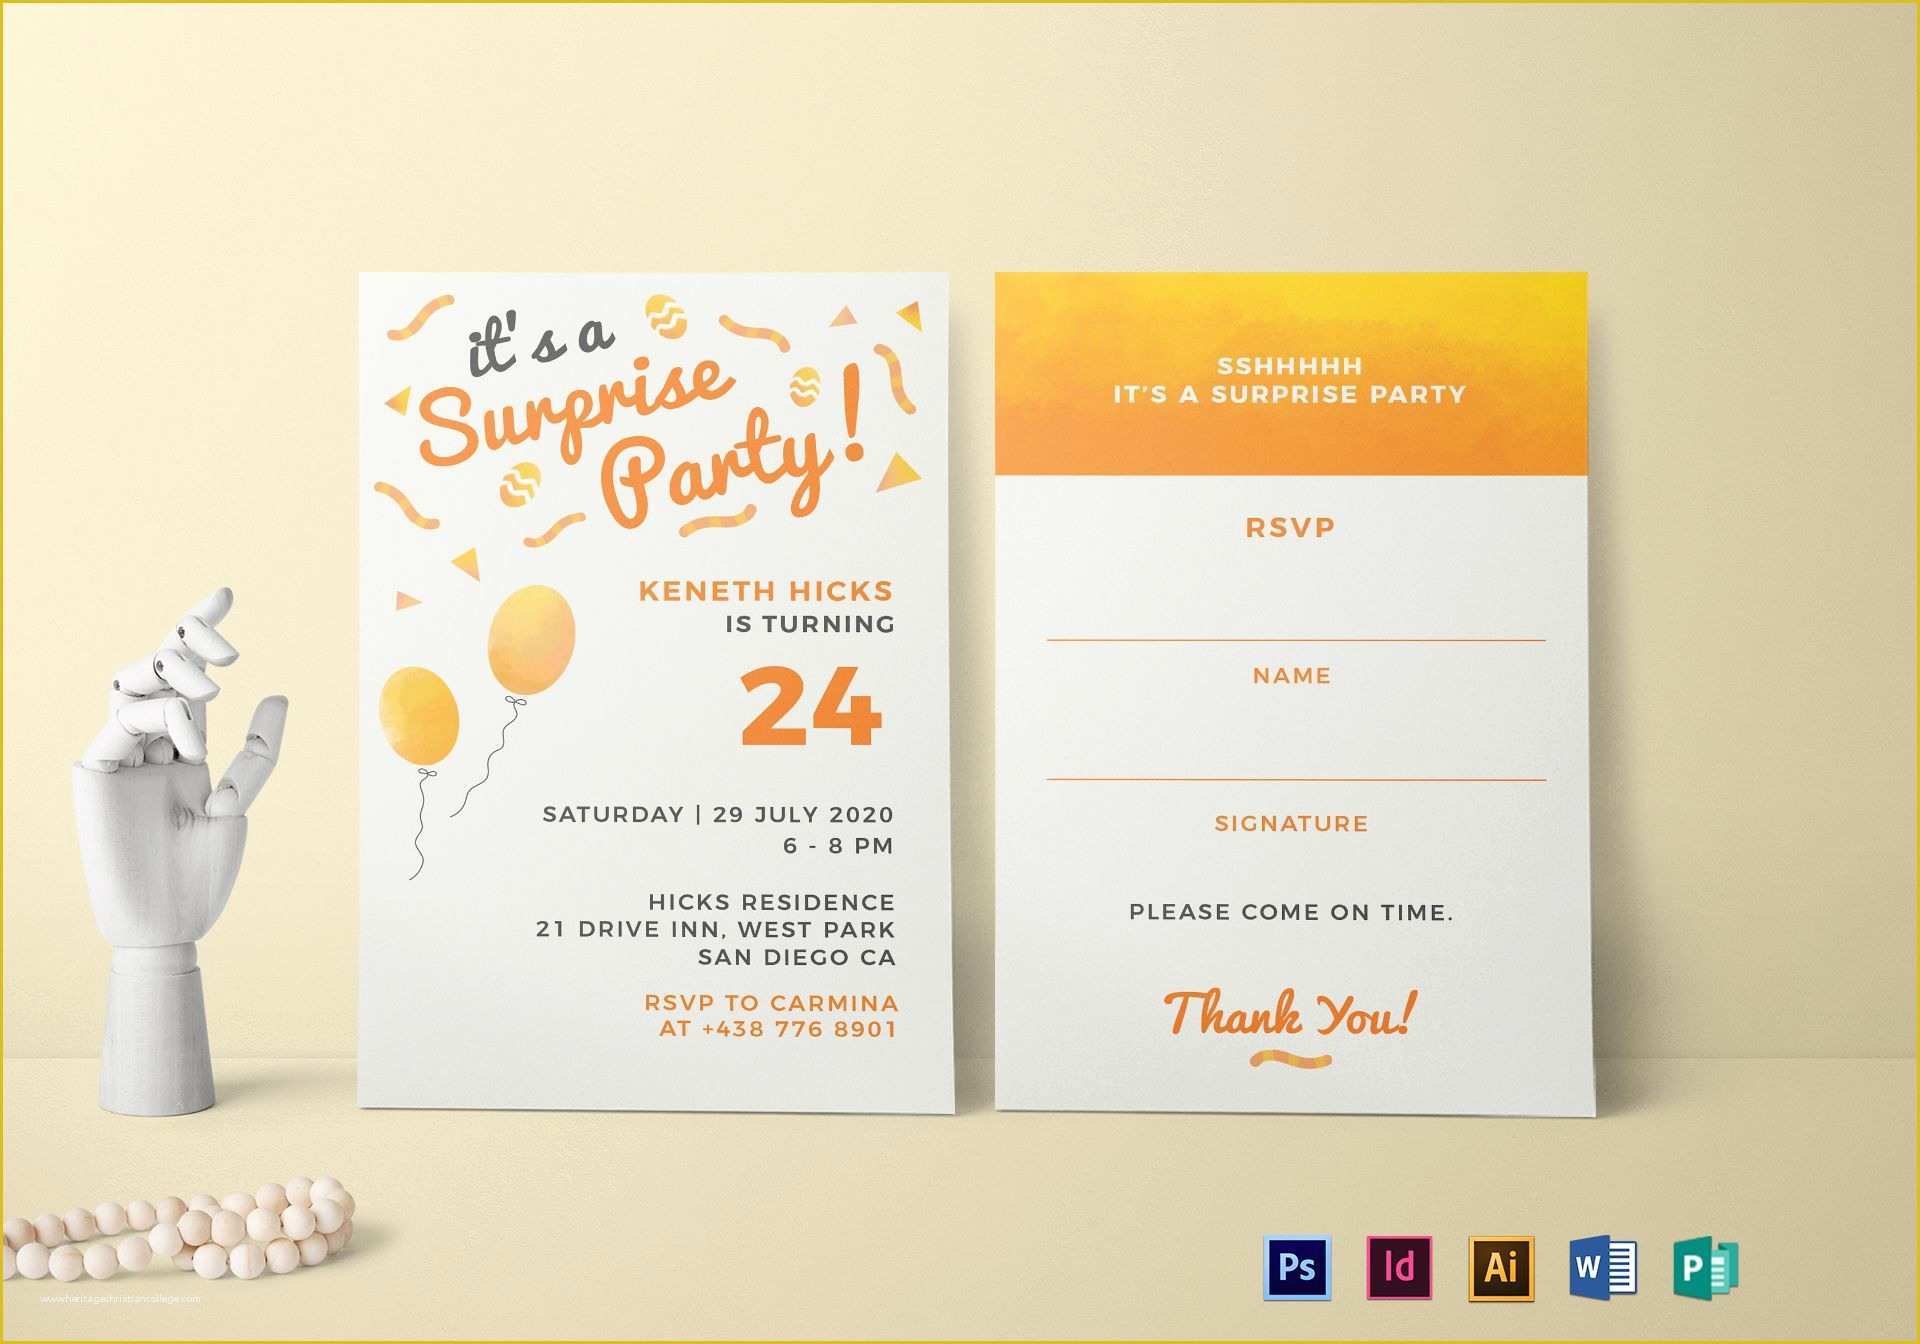 Surprise Party Invitations Templates Free Of Surprise Birthday Party Invitation Design Template In Psd